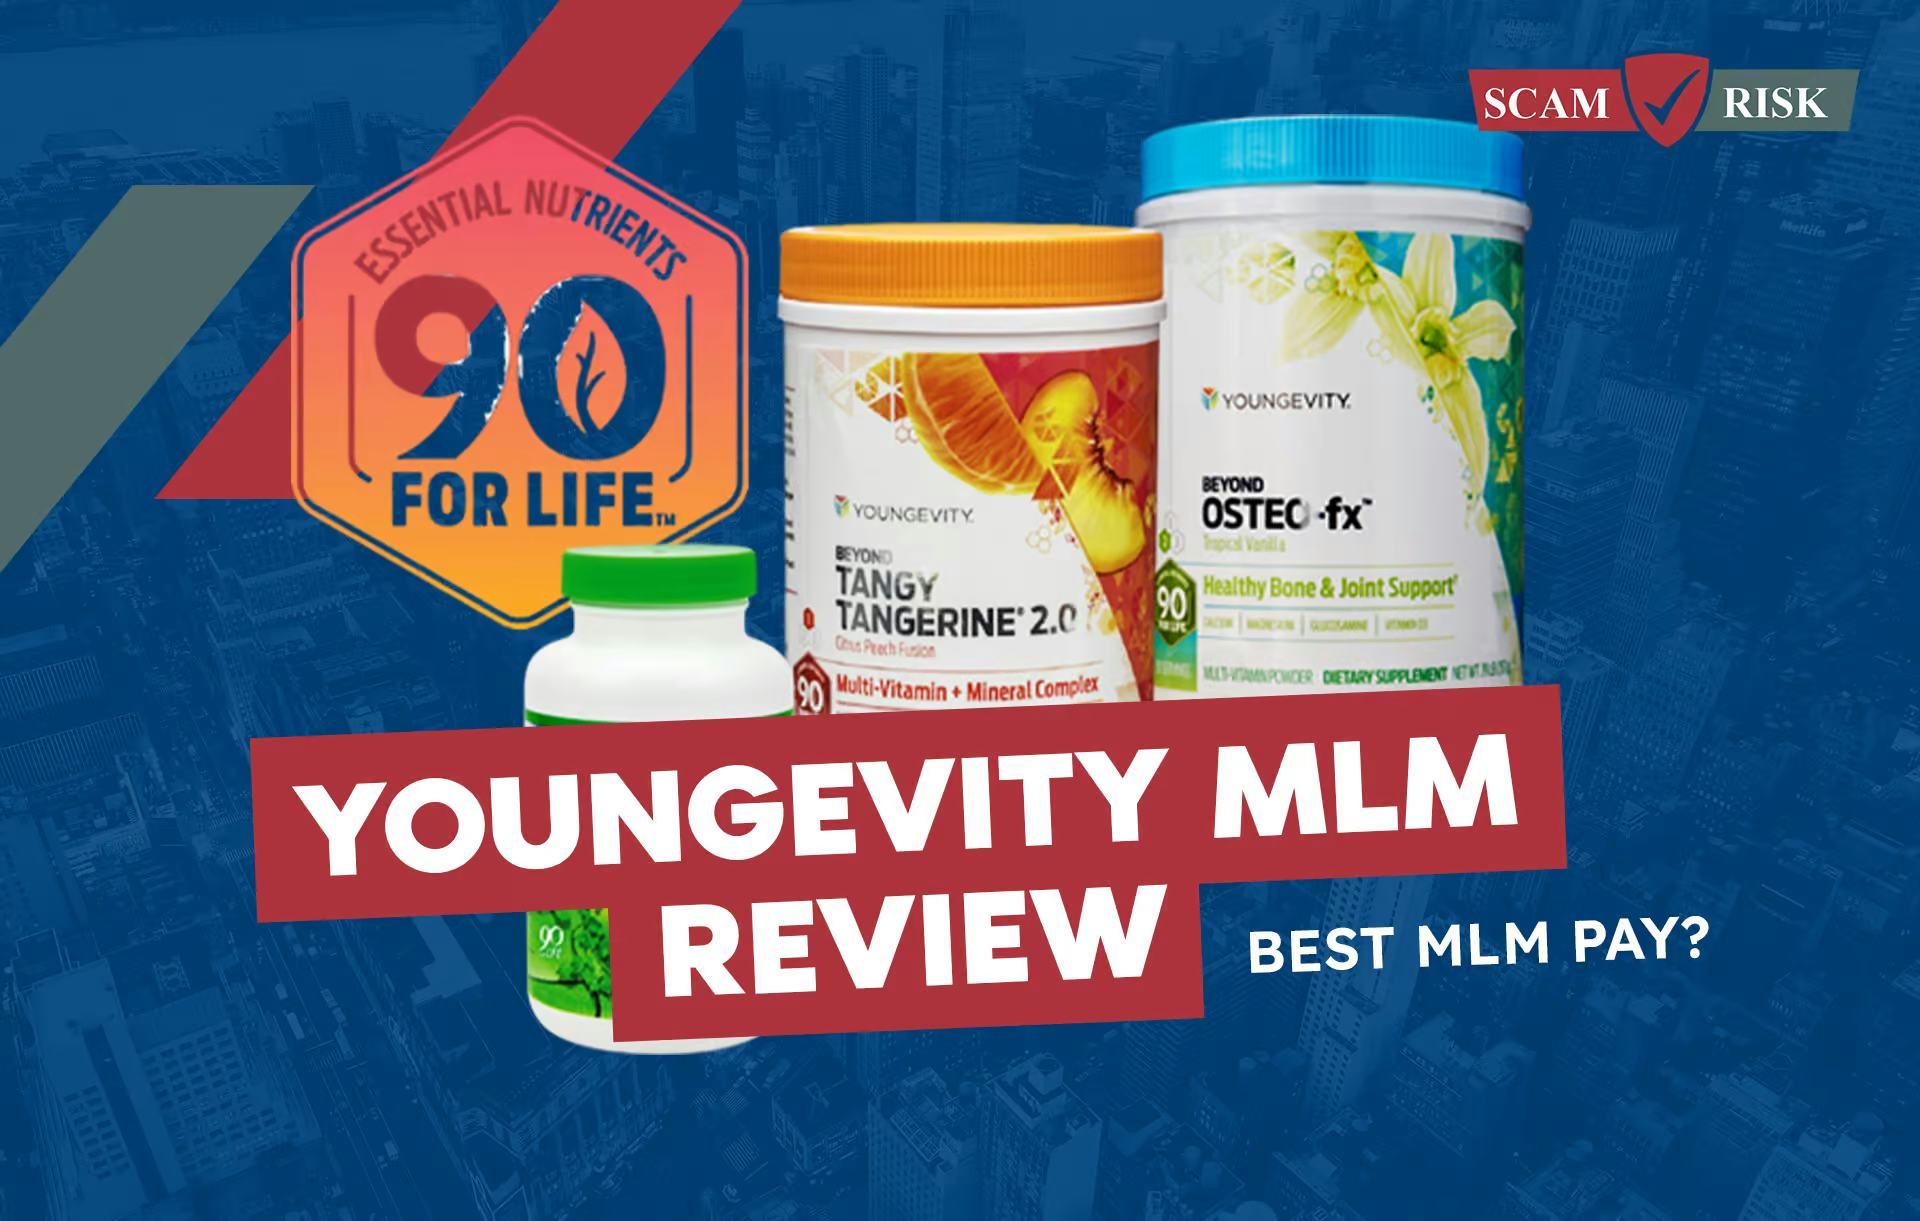 Youngevity Reviews: Best MLM Pay?